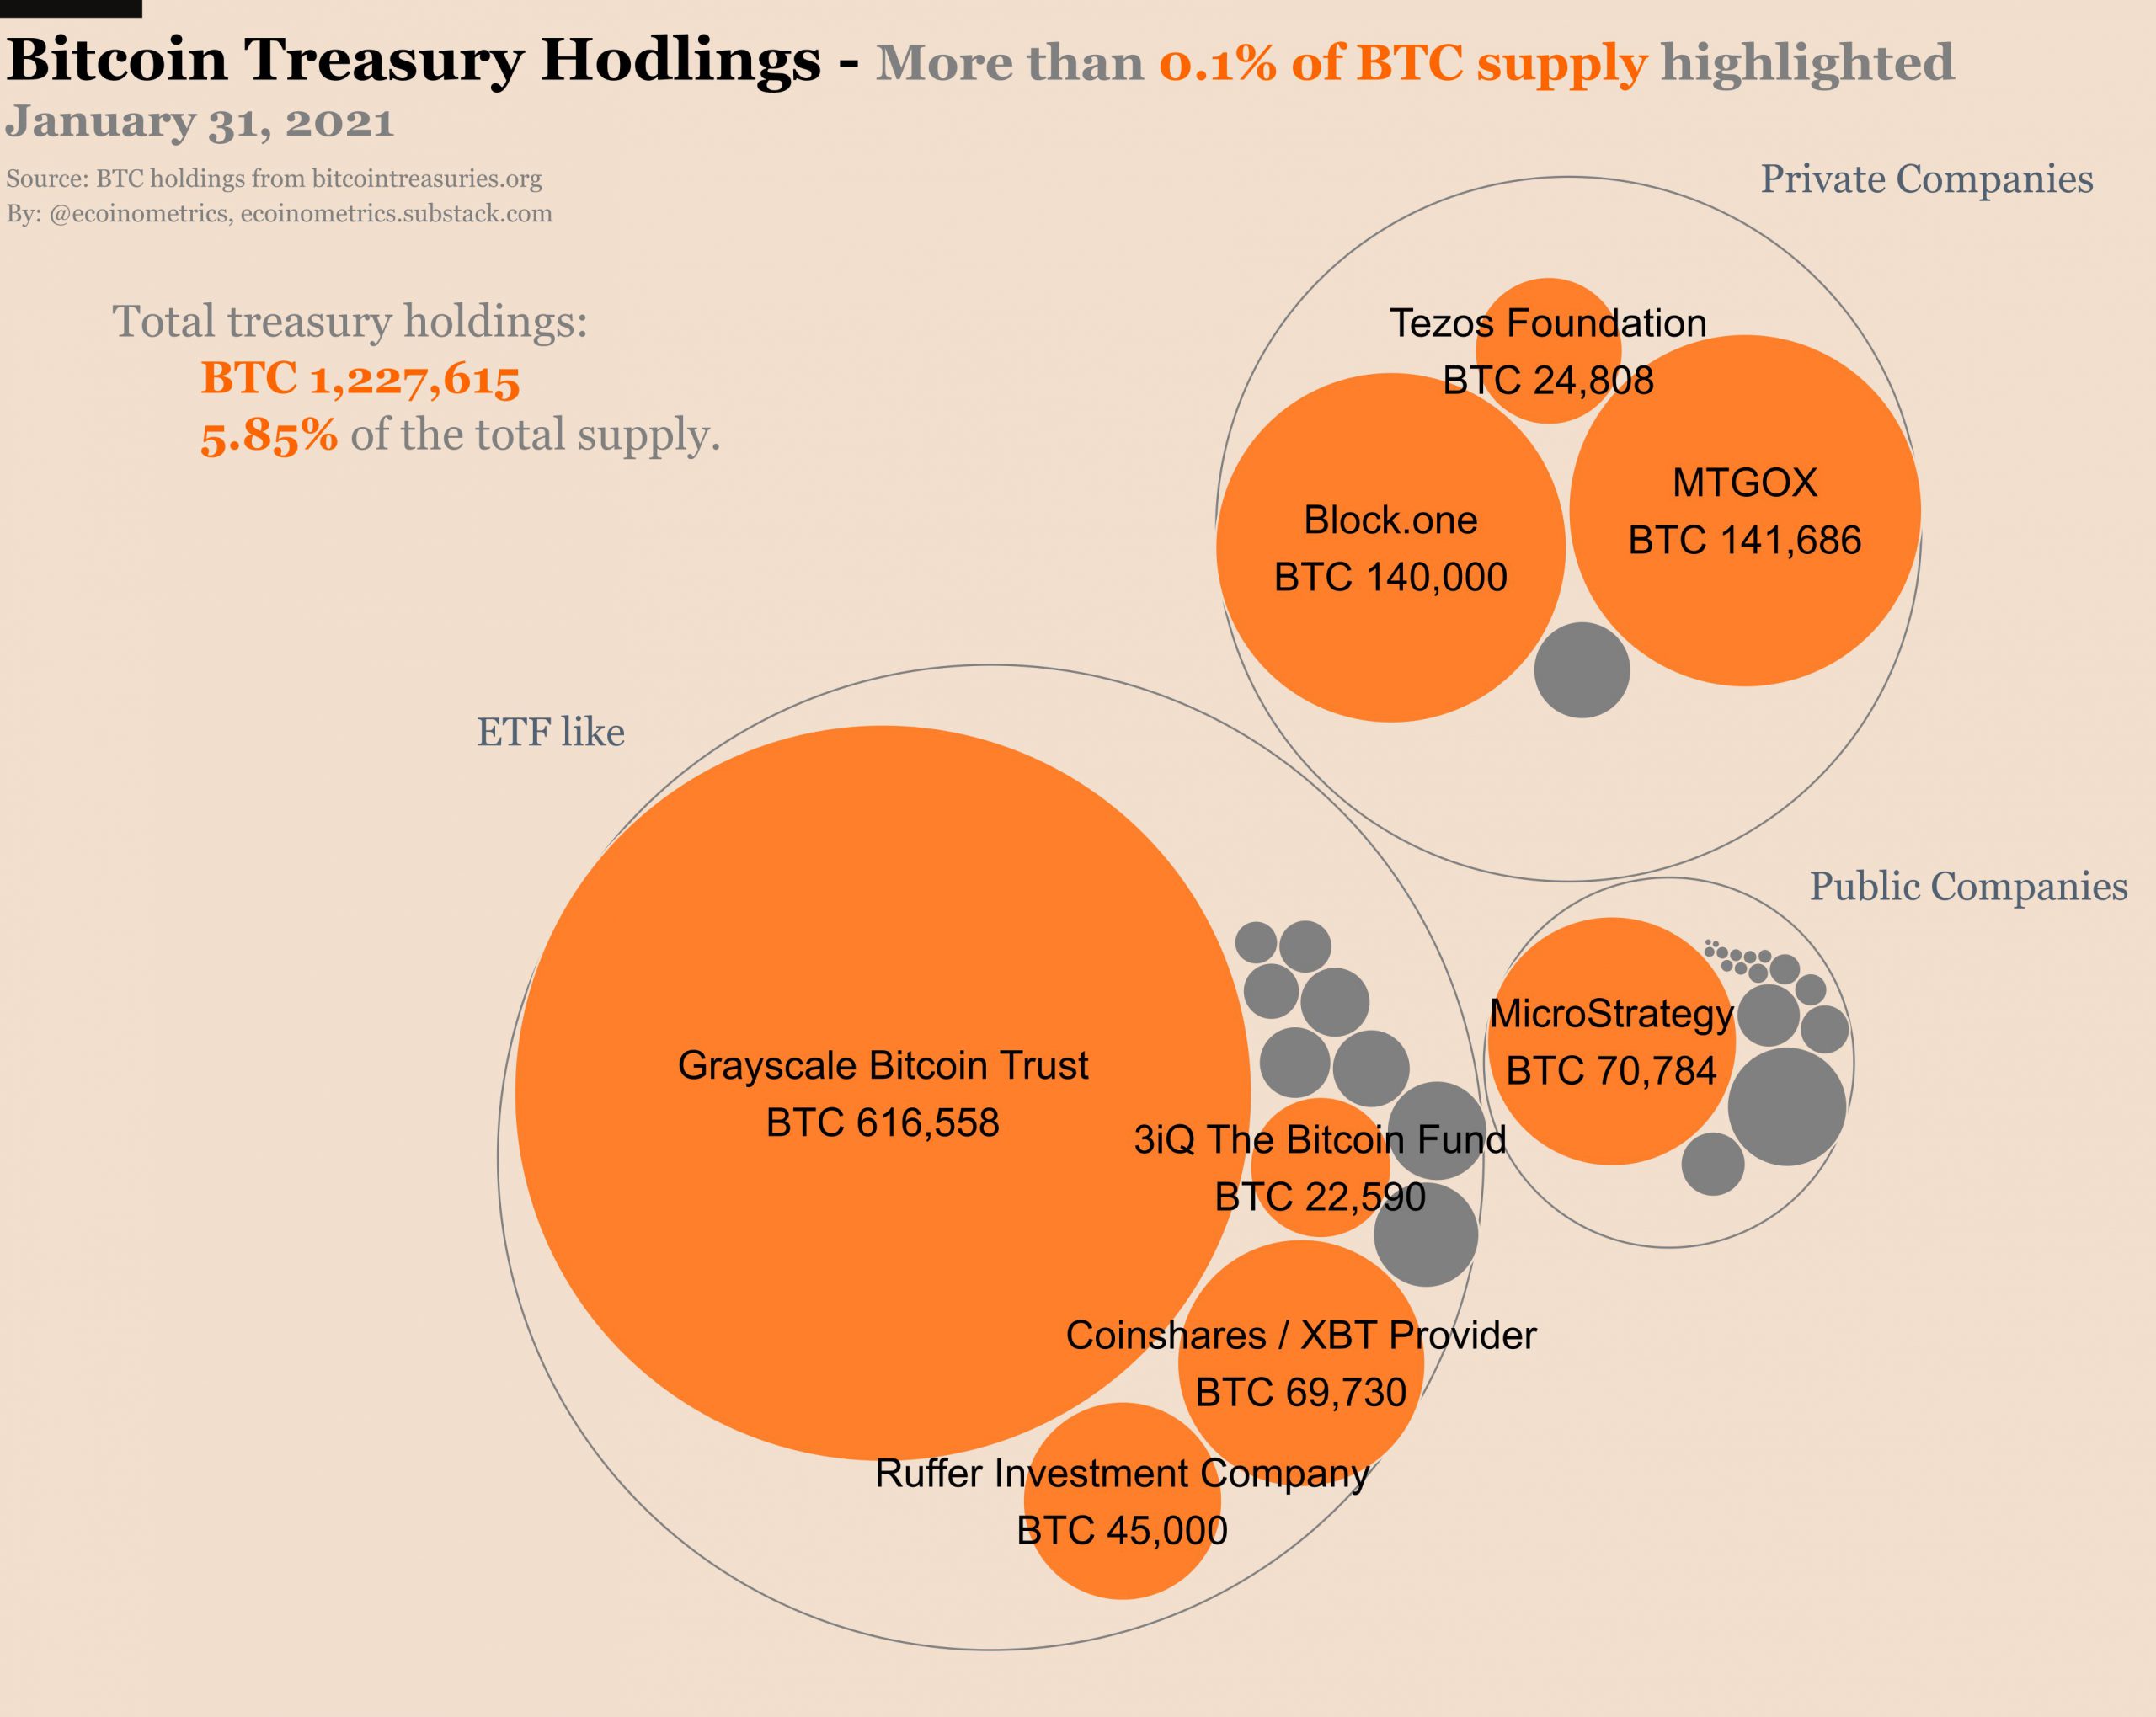 Treasuries now hold 5.85% of Bitcoin's supply